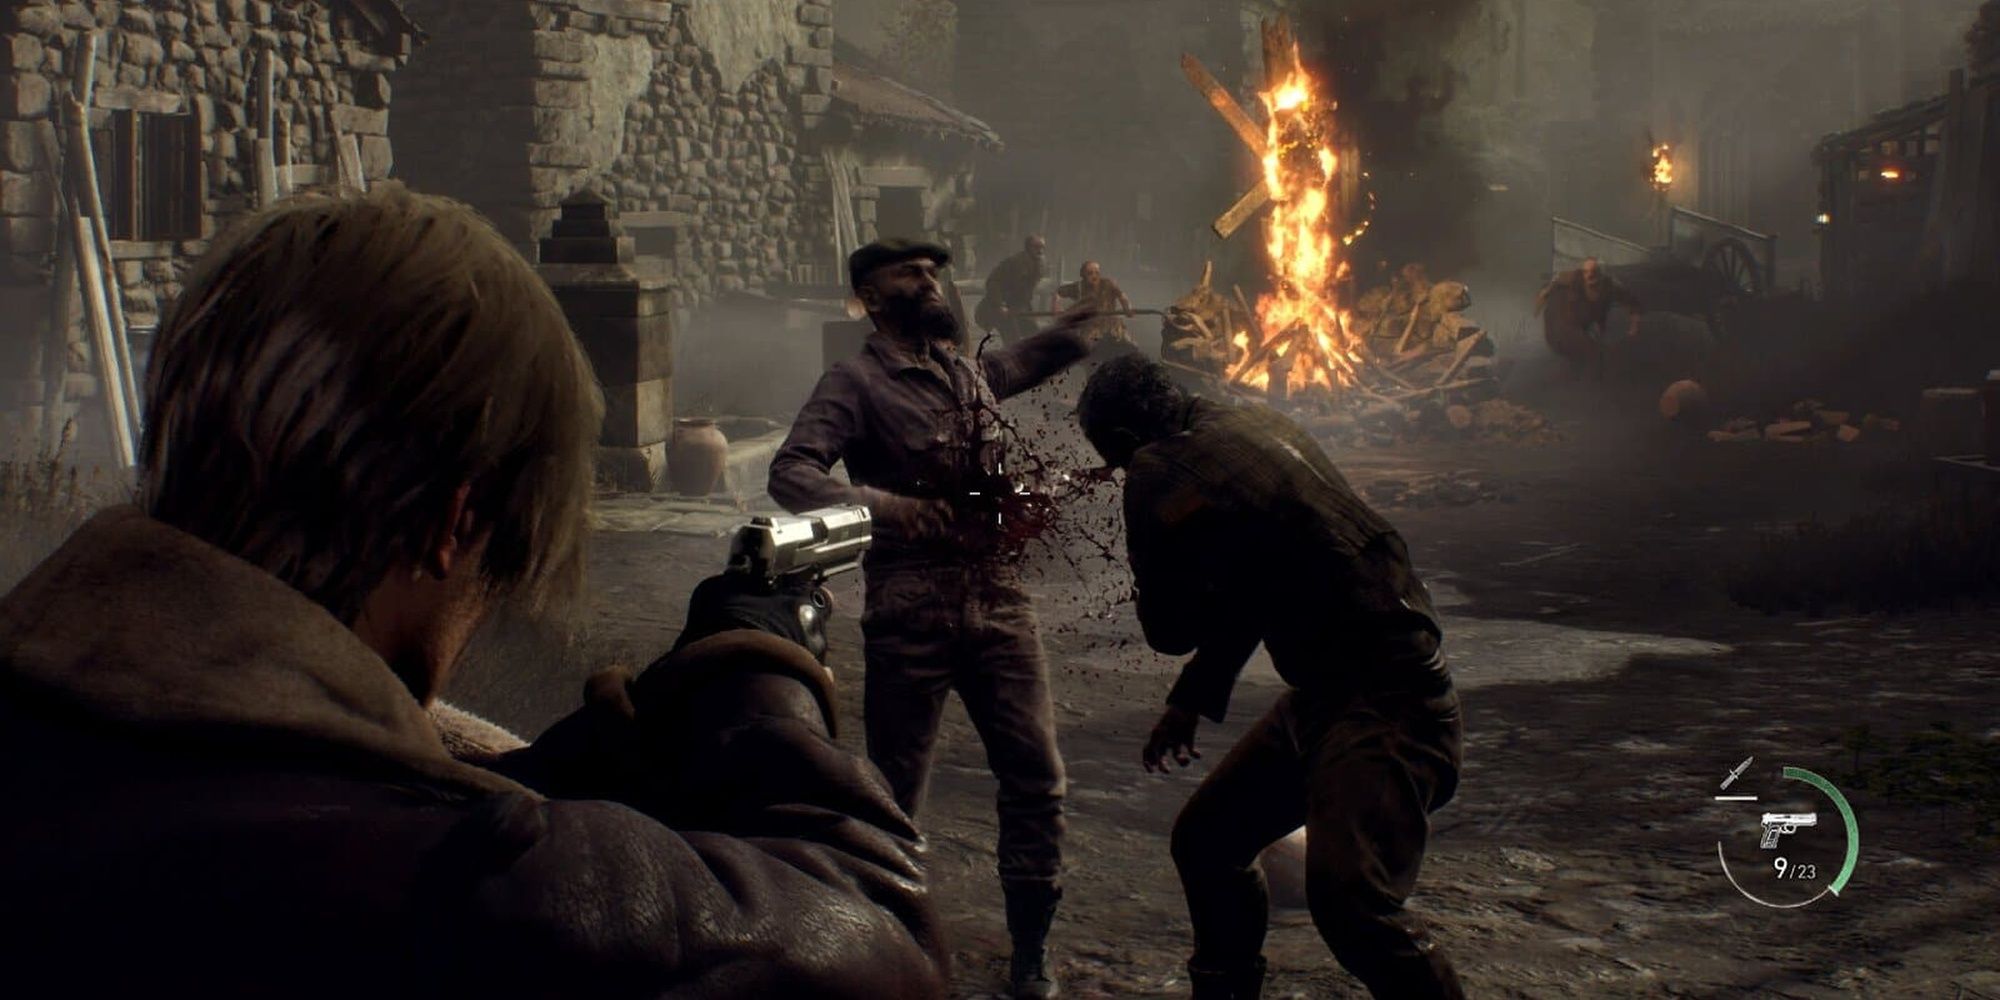 Resident Evil 4 - Remake: Villagers attack Leon Kennedy